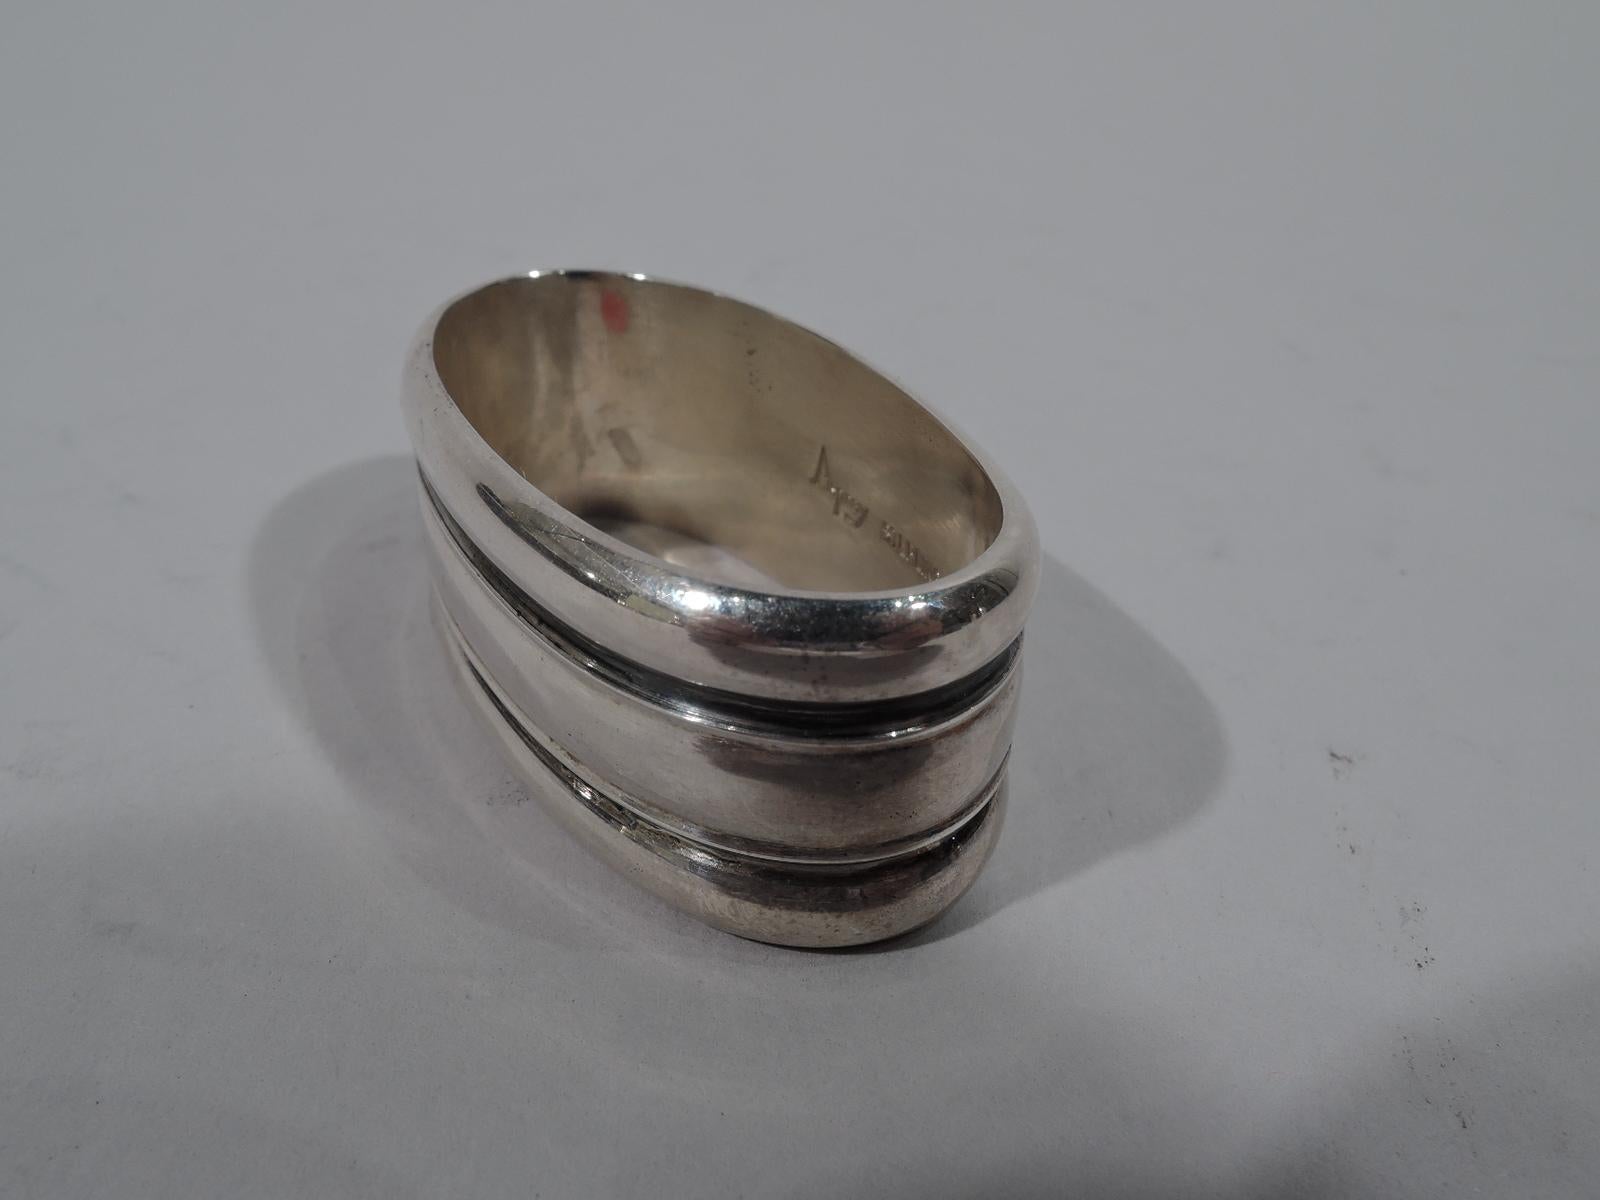 Midcentury Modern sterling silver napkin ring. Oval and lobed with tooled wraparound lines. Nice heft. Marked “Asprey Sterling”. Weight: 1.8 troy ounces.